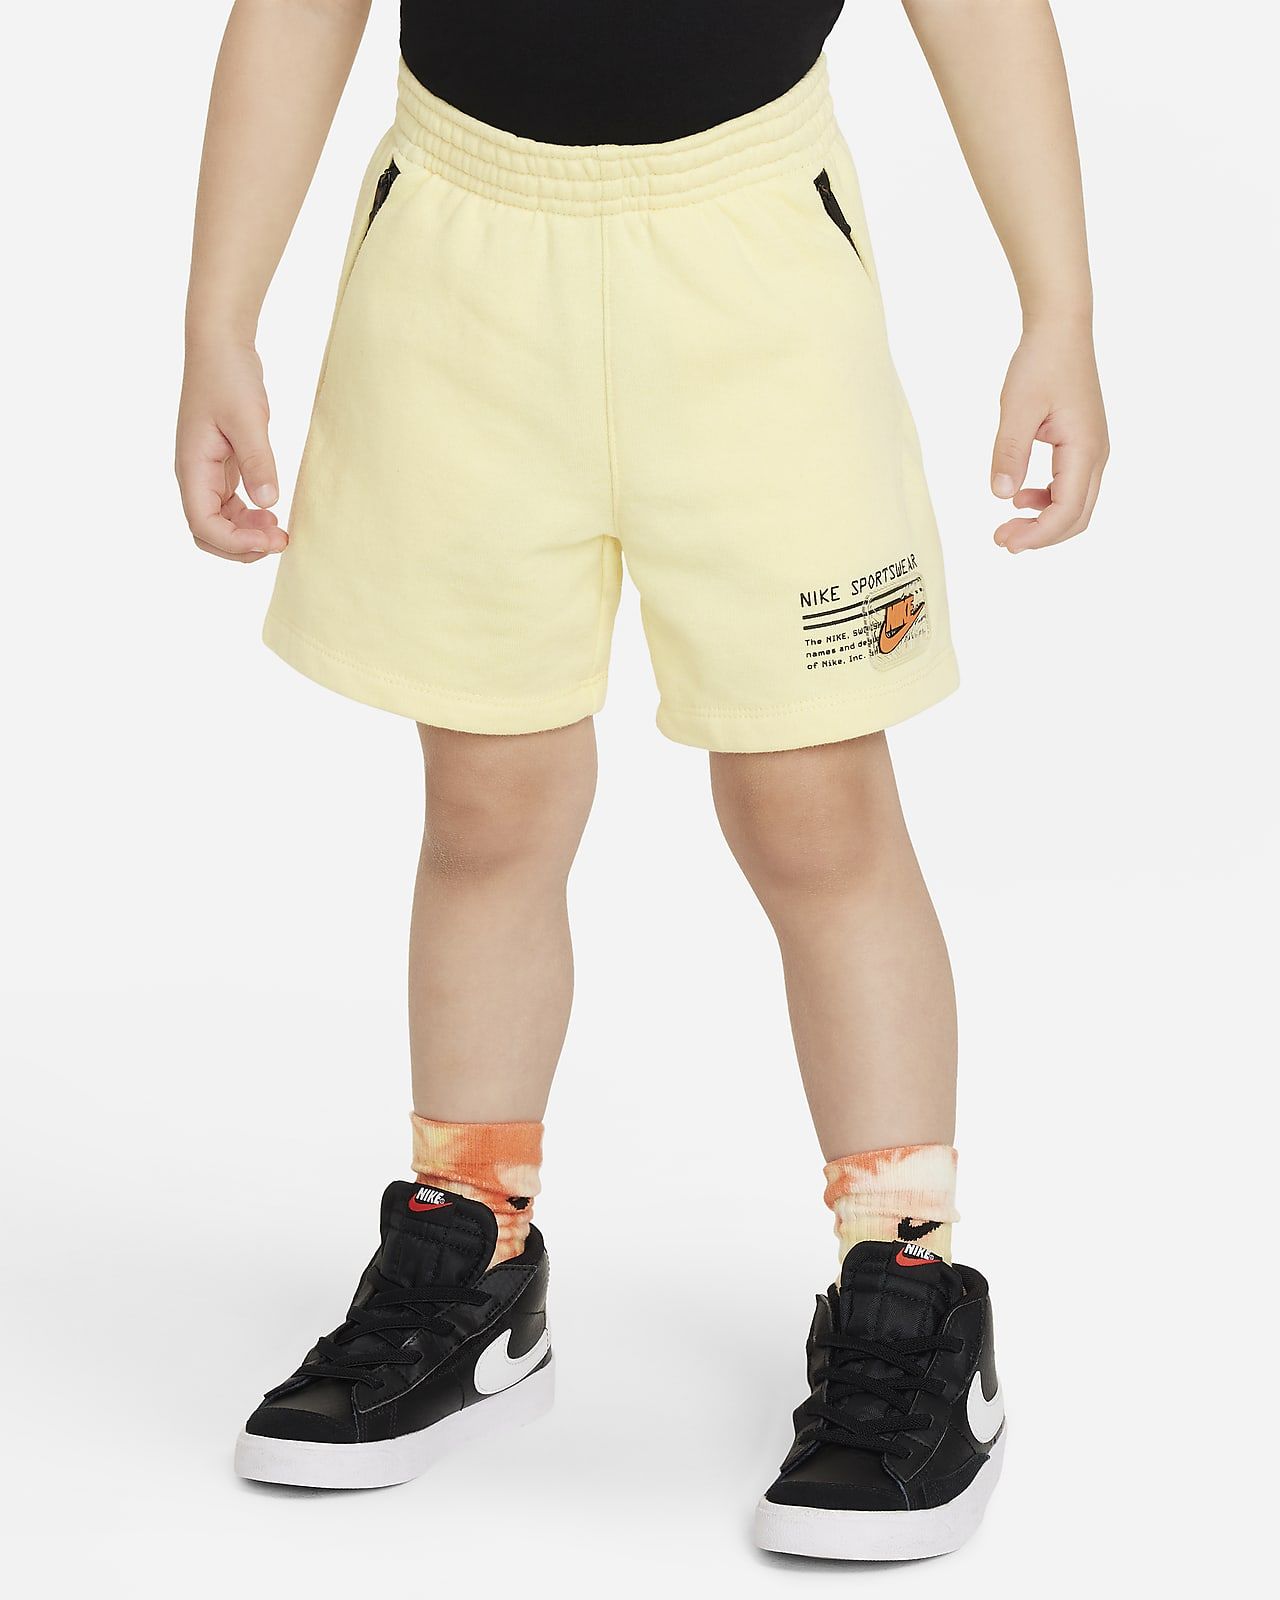 Nike Sportswear Paint Your Future Toddler French Terry Shorts. Nike.com | Nike (US)